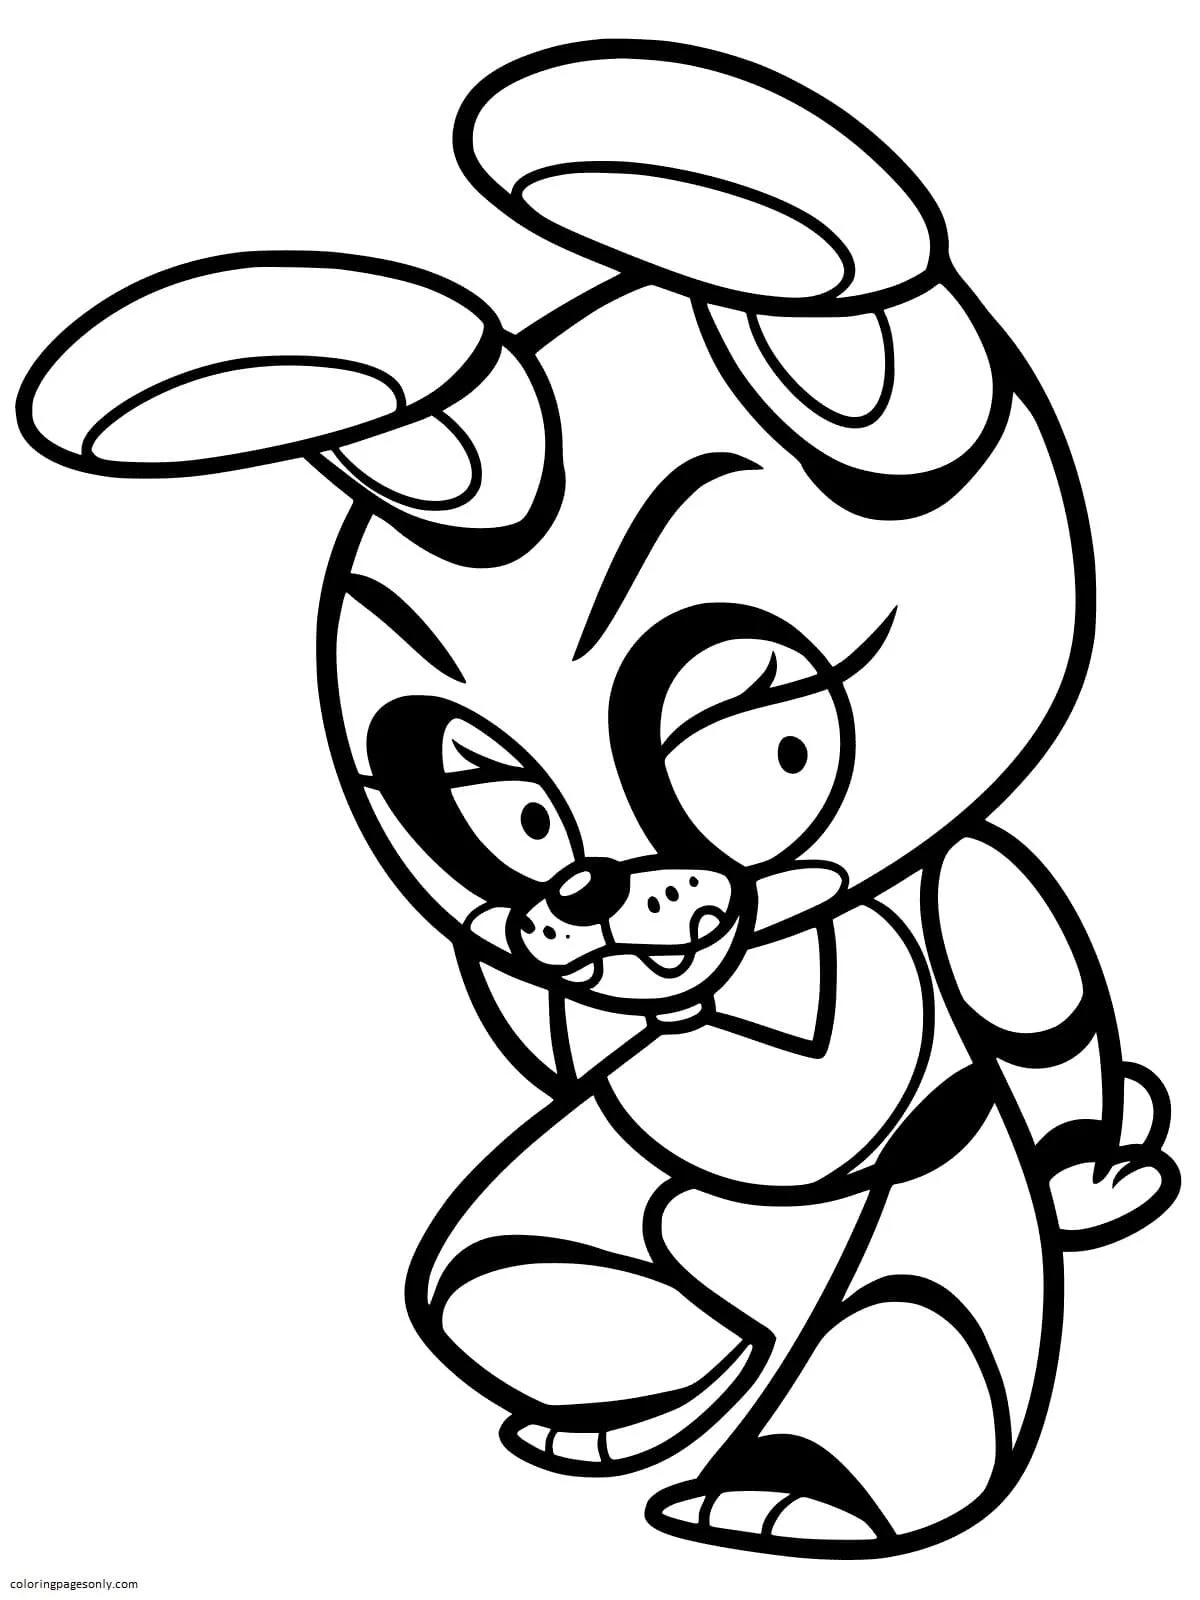 Five Nights At Freddy's Coloring Pages